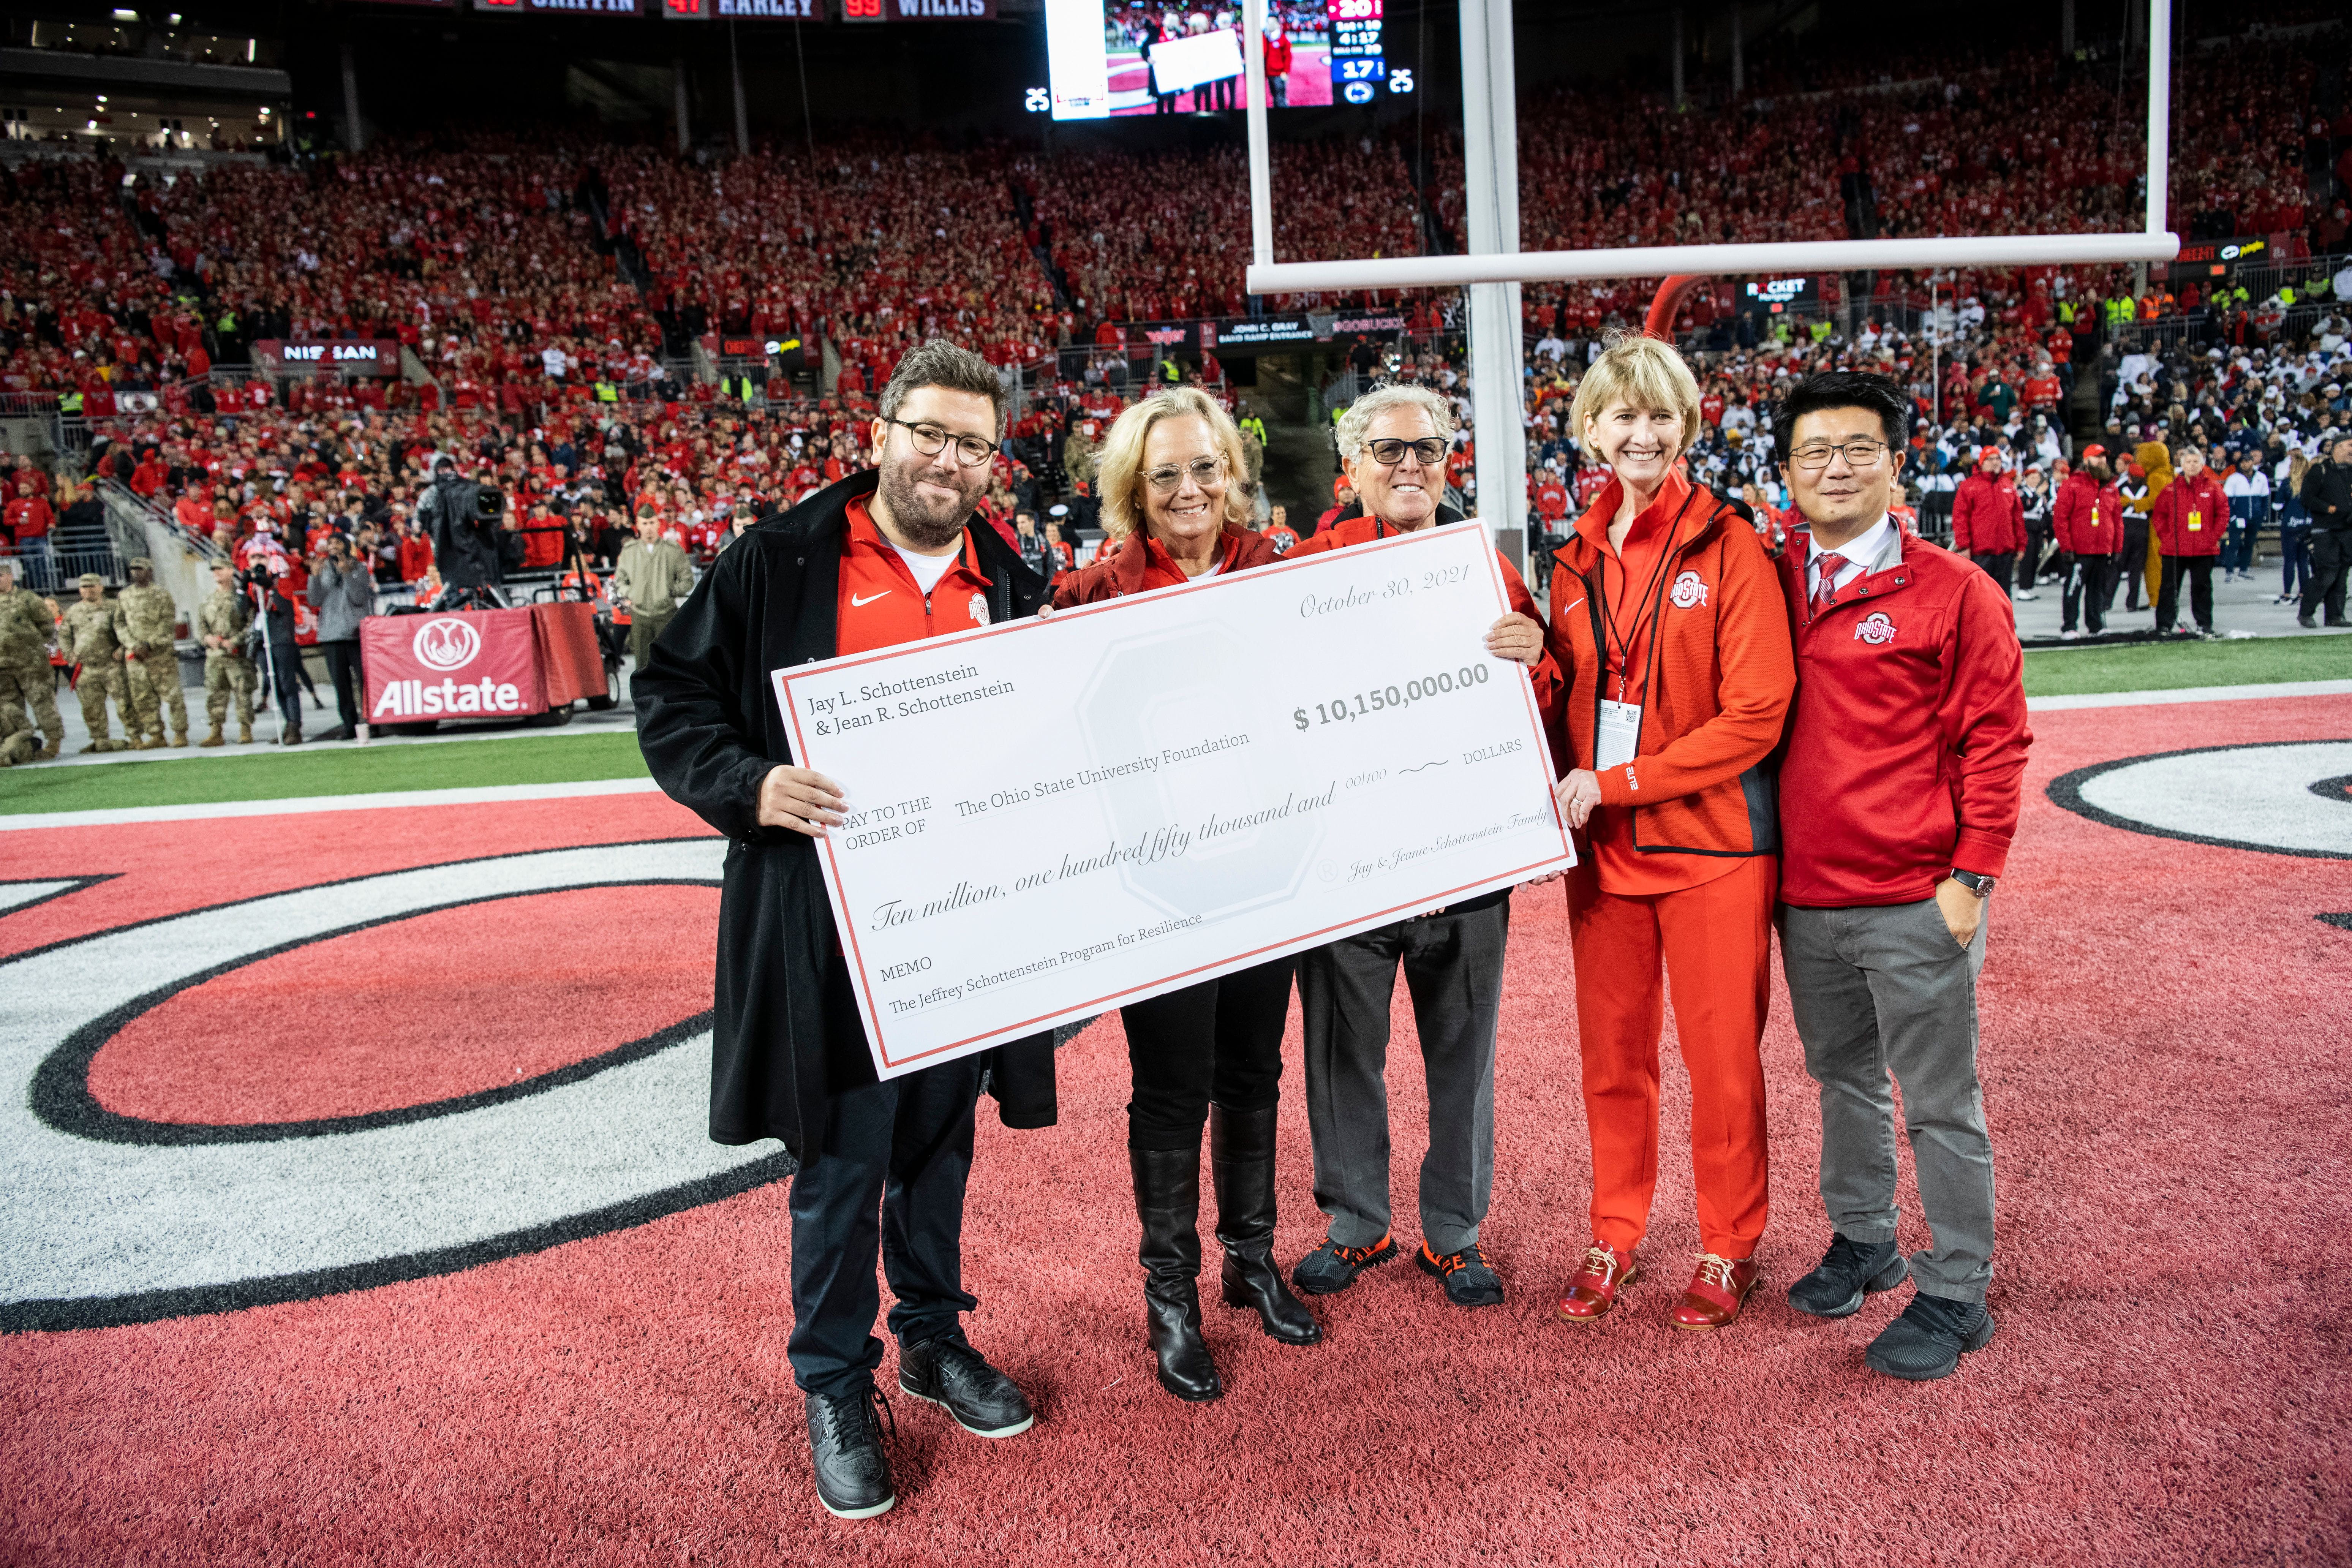 The Schottensteins, President Kristina Johnson and Dr. K. Luan Phan on the field at Ohio Stadium during the Ohio State-Penn State football game.